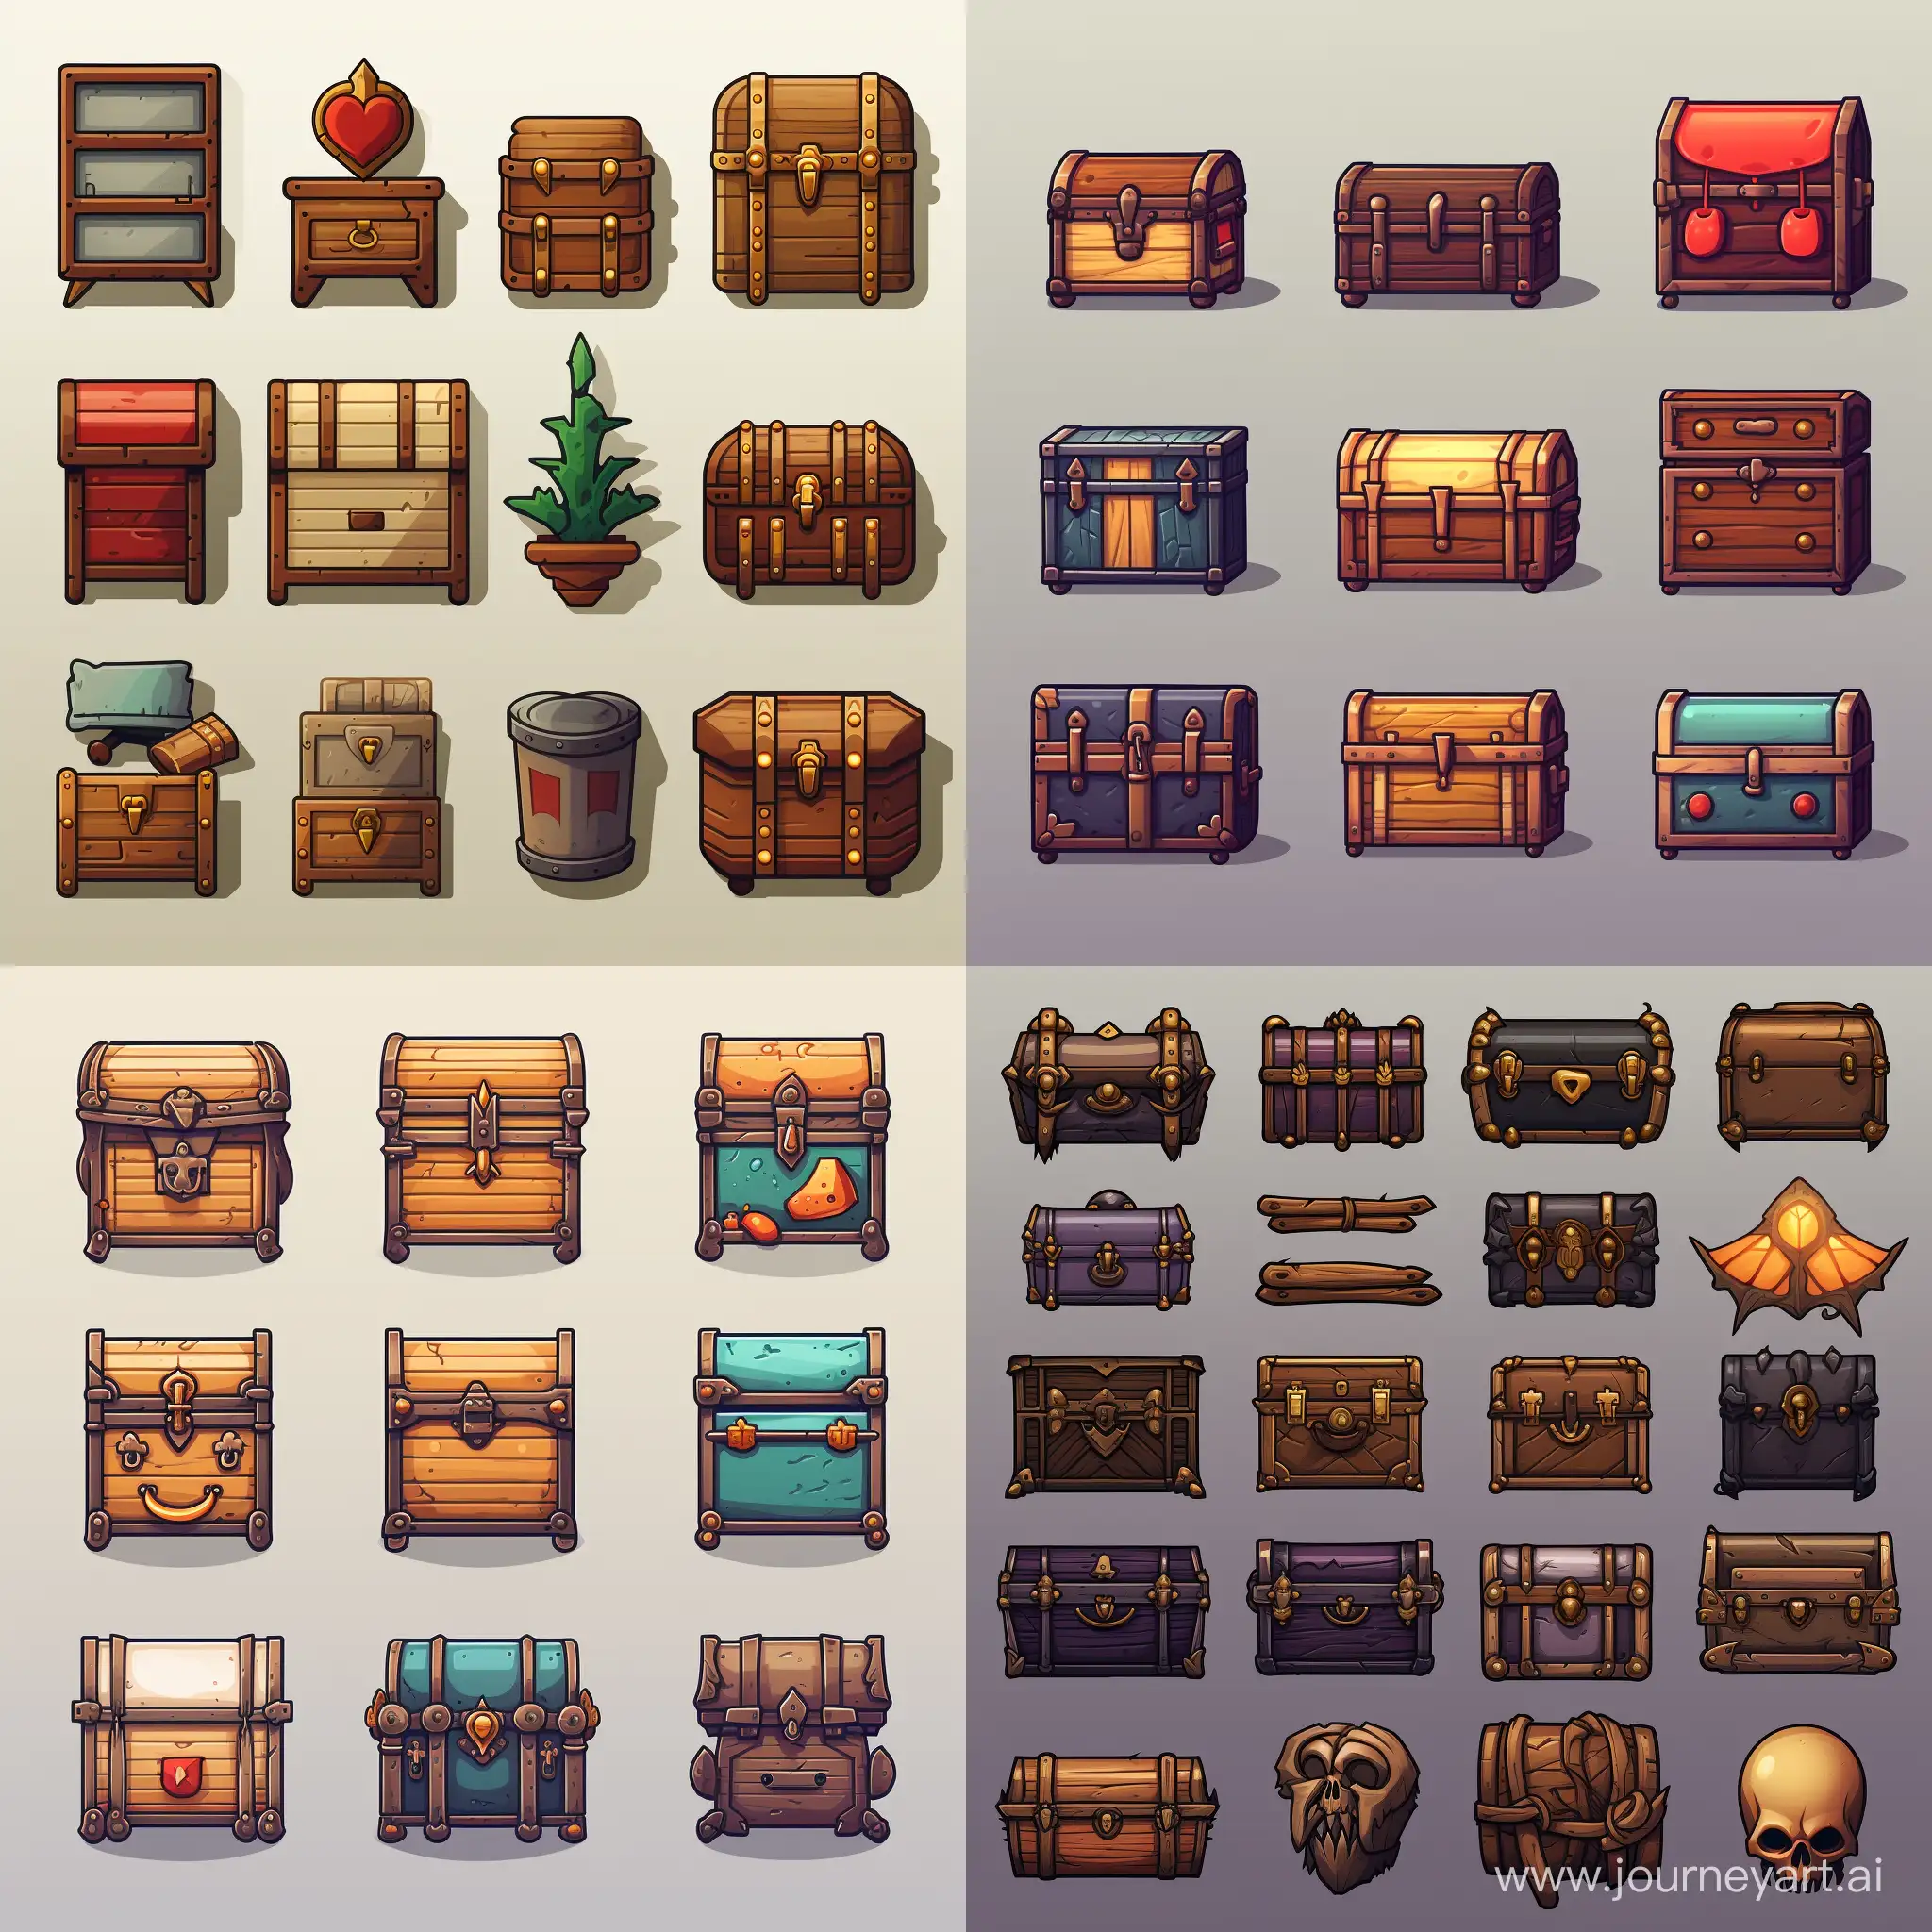 pixel item icons, chests